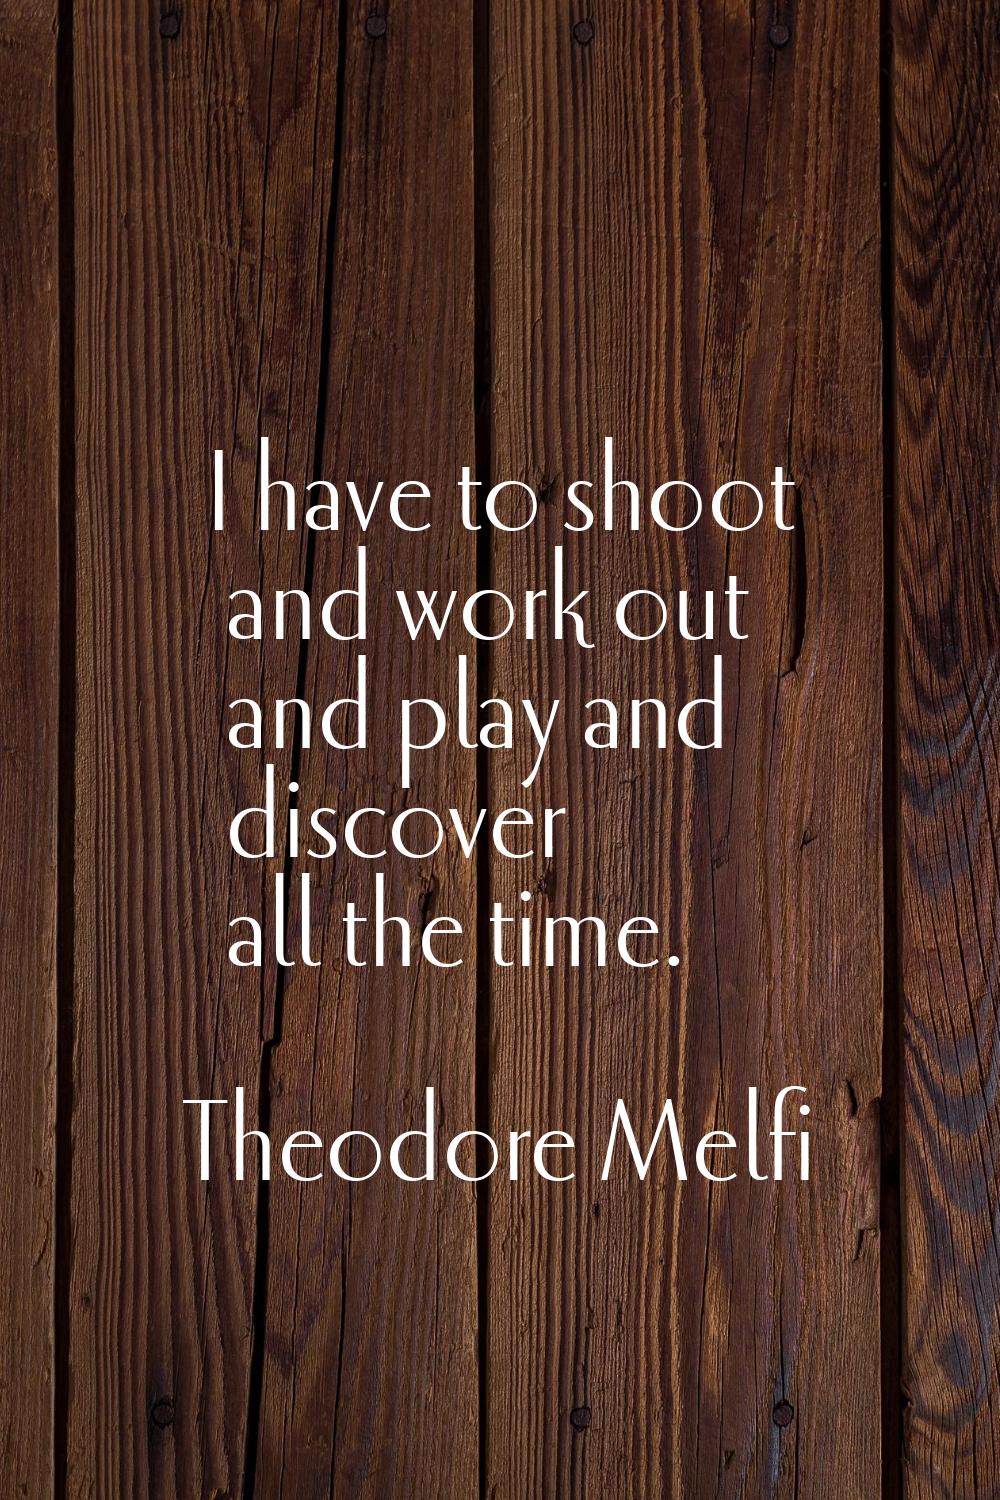 I have to shoot and work out and play and discover all the time.